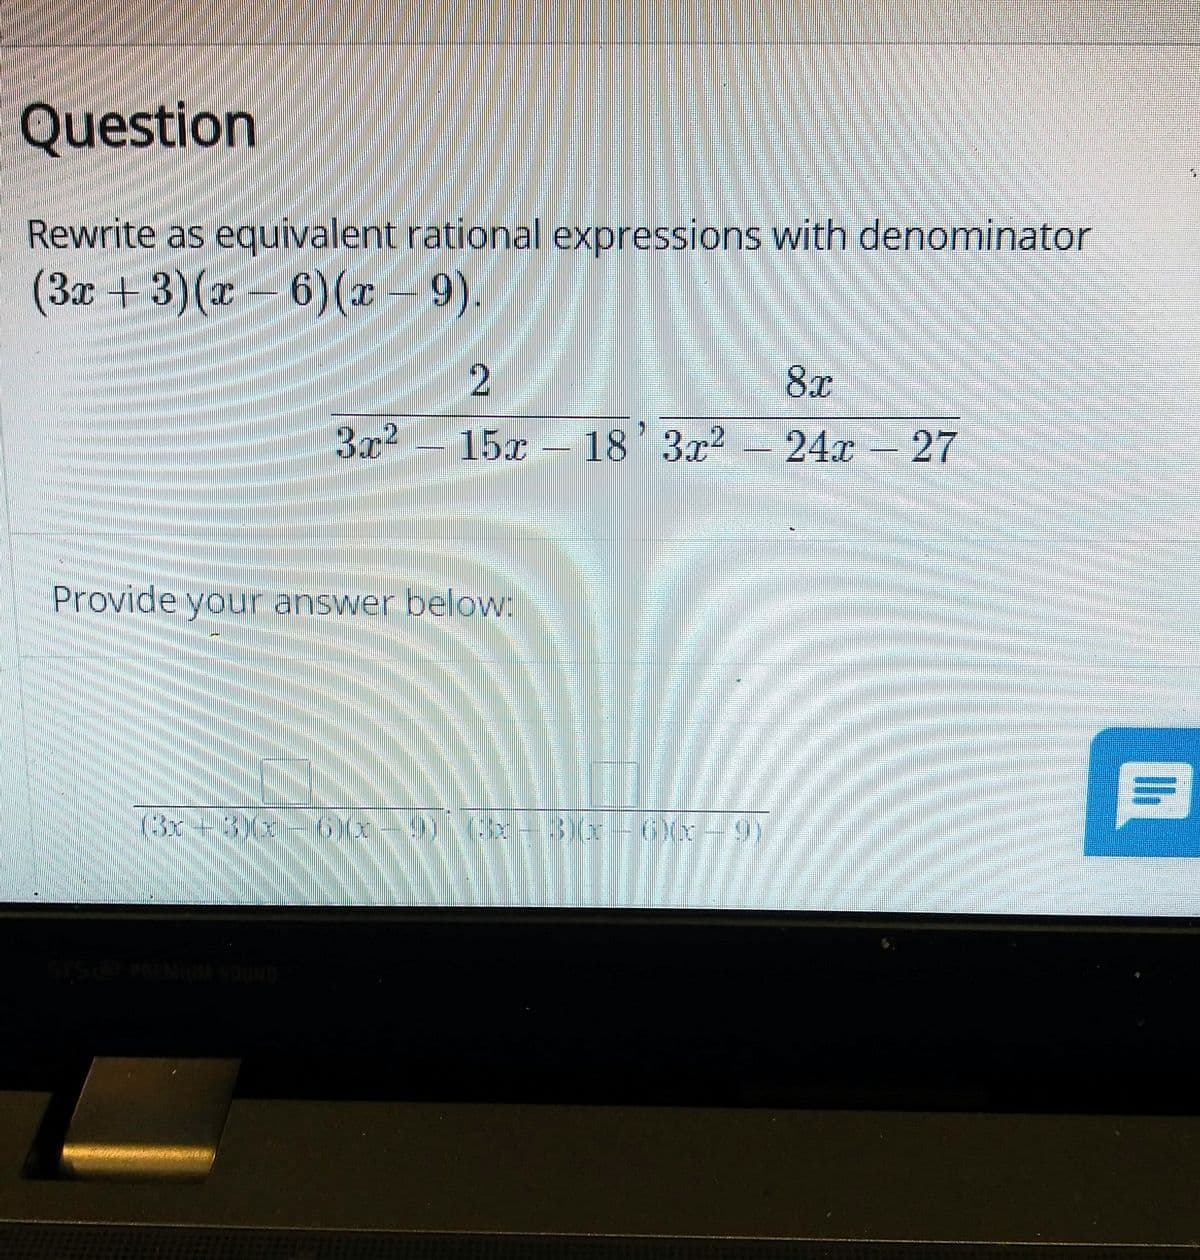 Question
Rewrite as equivalent rational expressions with denominator
(3x+3)(x – 6)(x – 9).
8x
3x?
15x – 18'3x?
-24x 27
Provide your answer below:
(3x+3)(x-6 -9)3x
3)x-6(x-9)
SO MINUM SOUND
